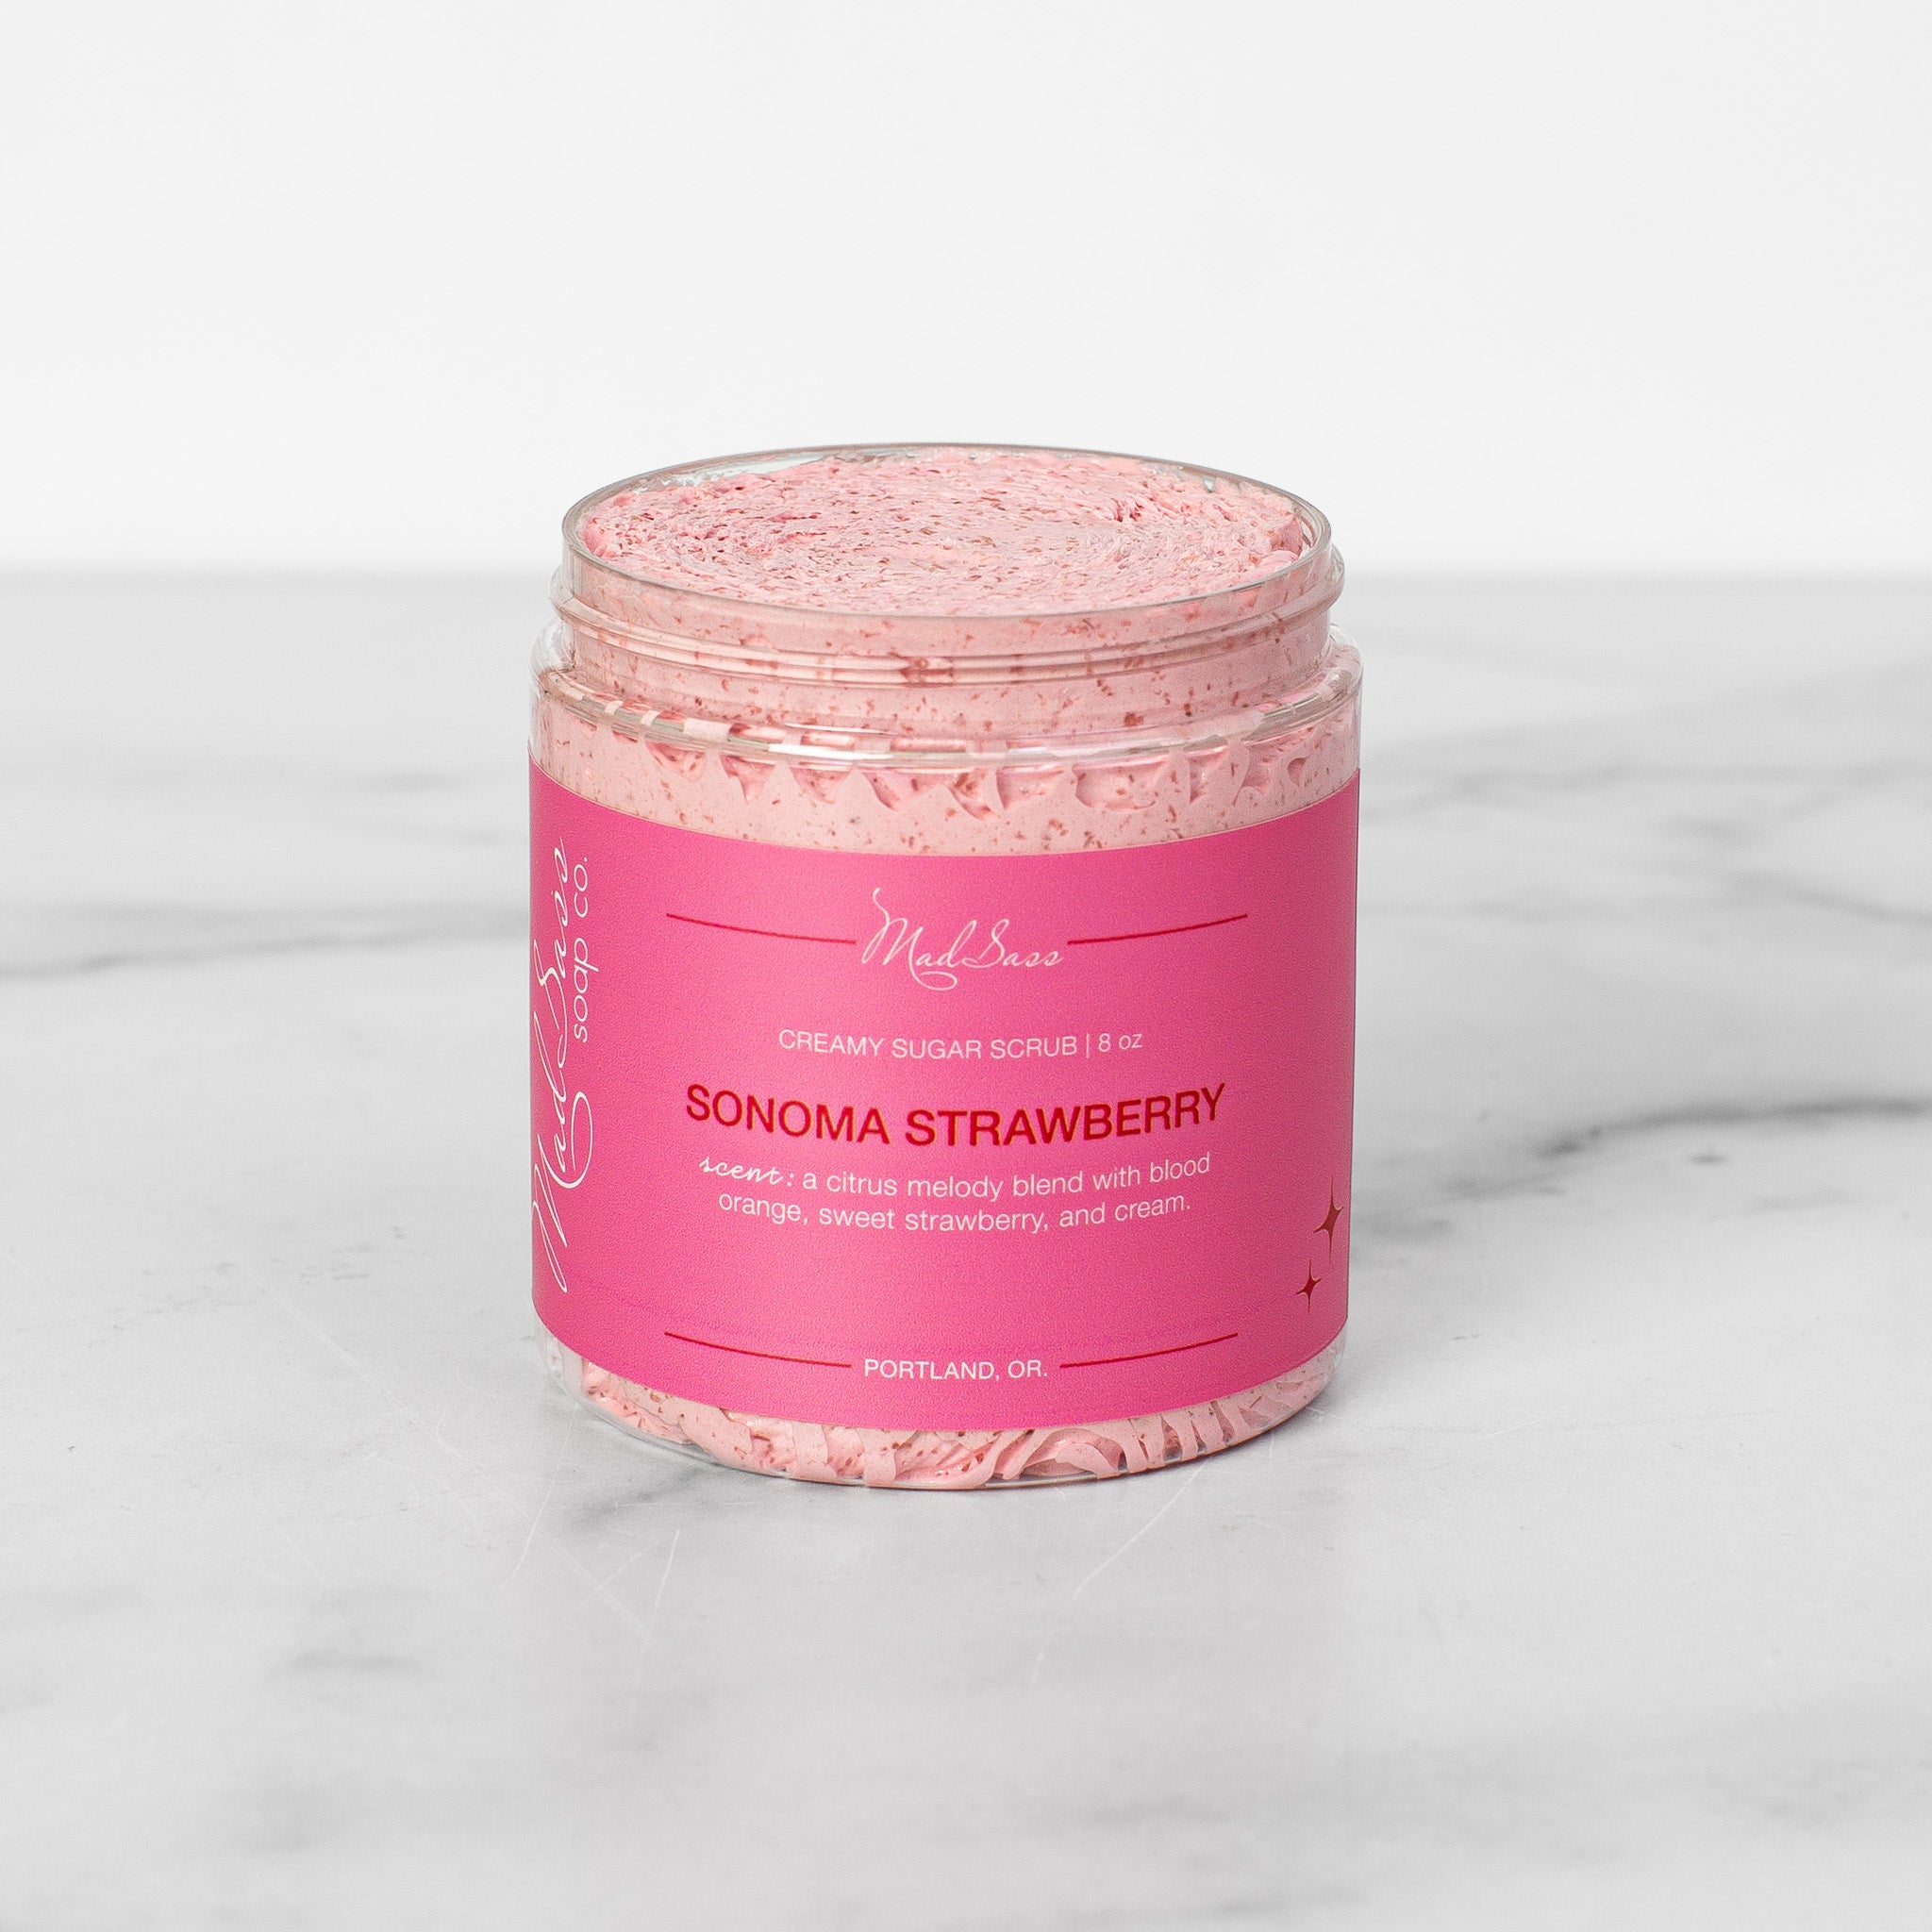 One container of Sonoma Strawberry Creamy Sugar Scrubs on a white background. Sonoma Strawberry is a light pink scrub in a clear tub.